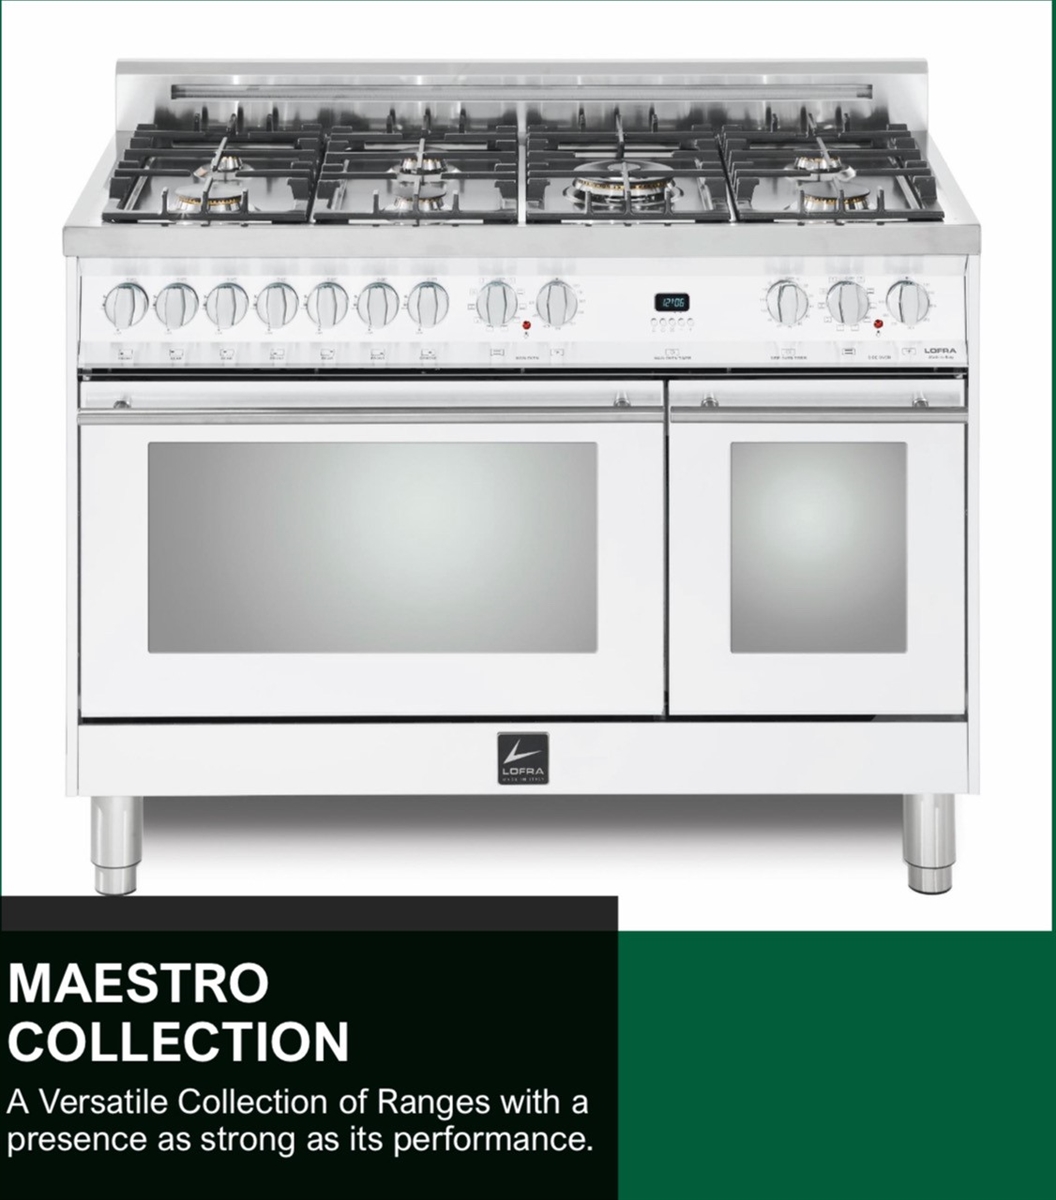 Lofra DolceVita Series 30 Inch Freestanding Dual Fuel Range Oven Stove,  Cooktop 5 Sealed Brass Burners, Convection, 9 Cooking Modes, Stainless  Steel